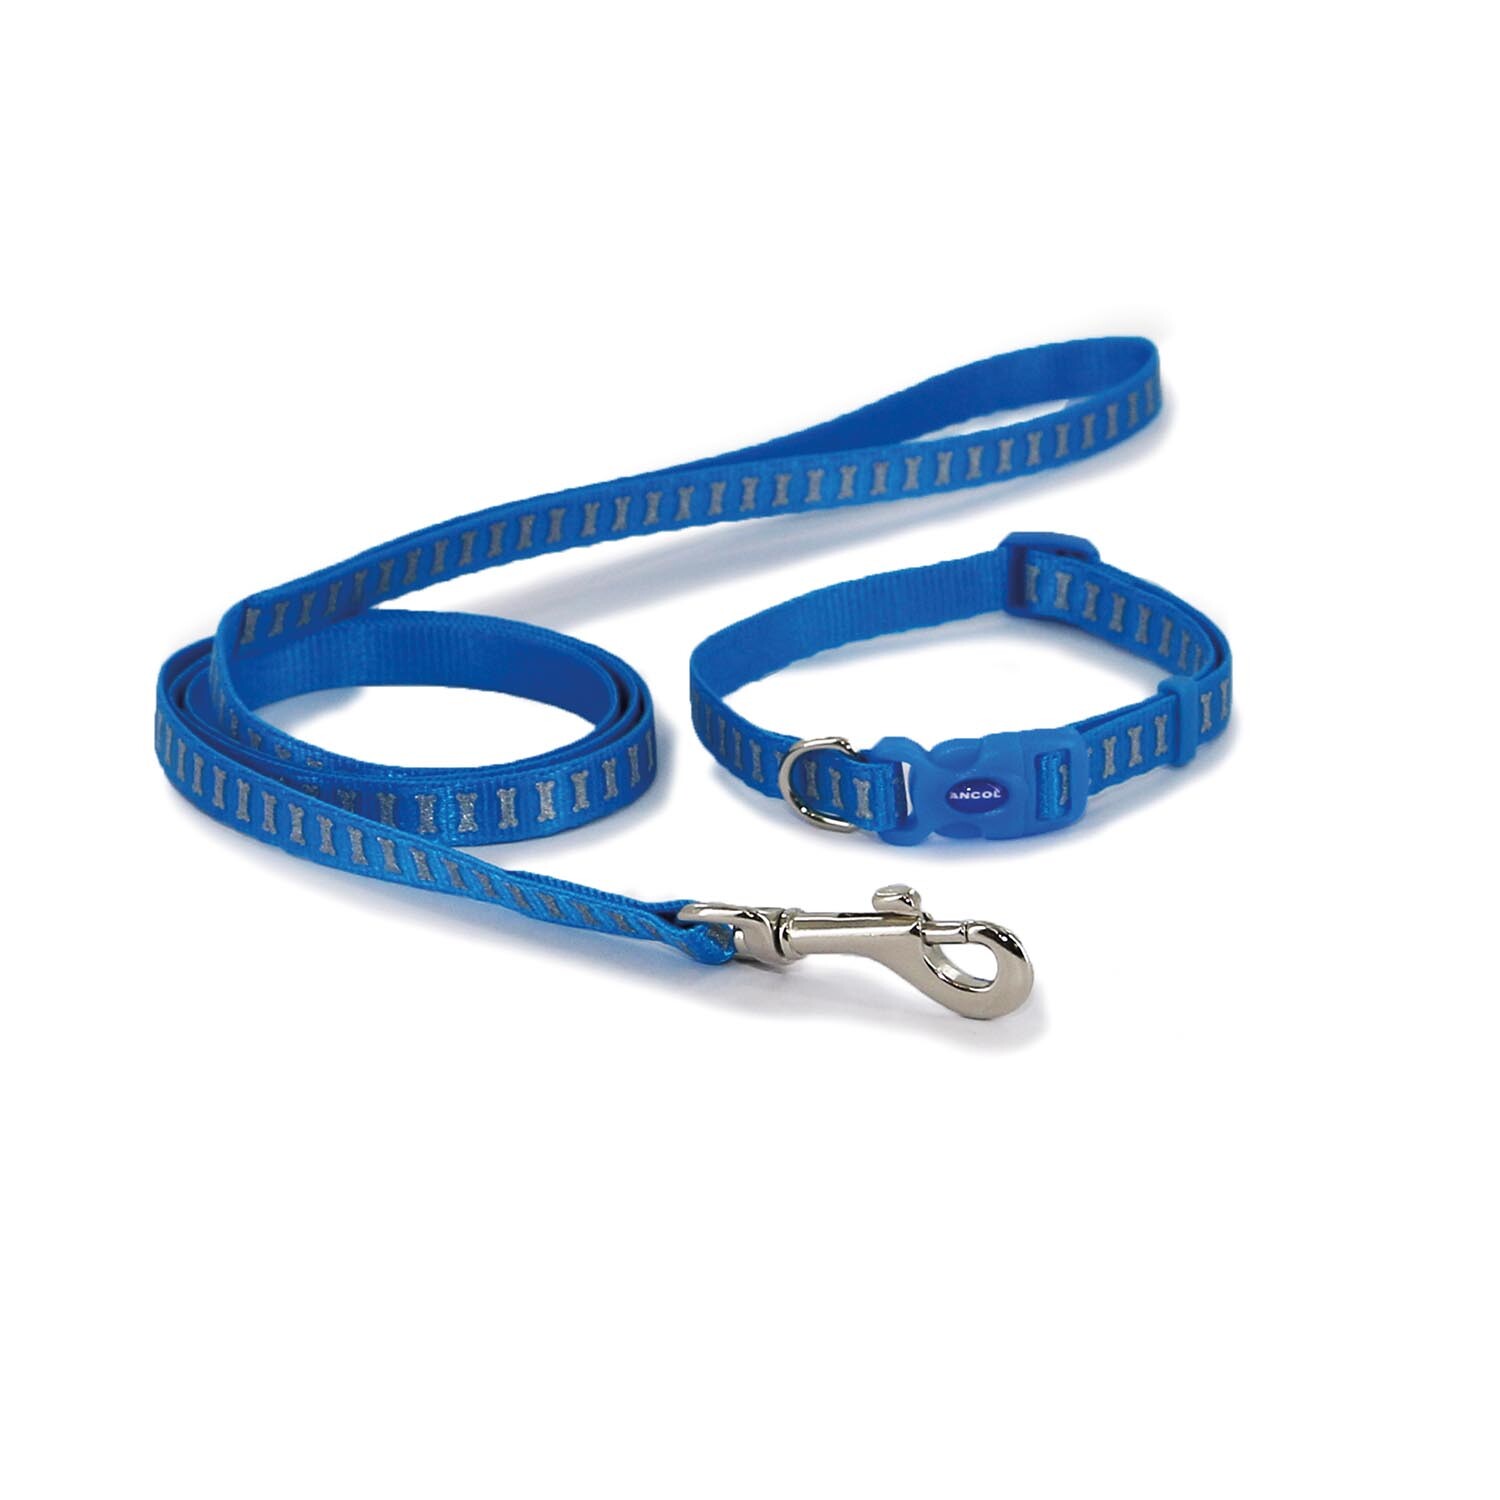 Small Bite Reflective Collar and Lead Set  - Blue Image